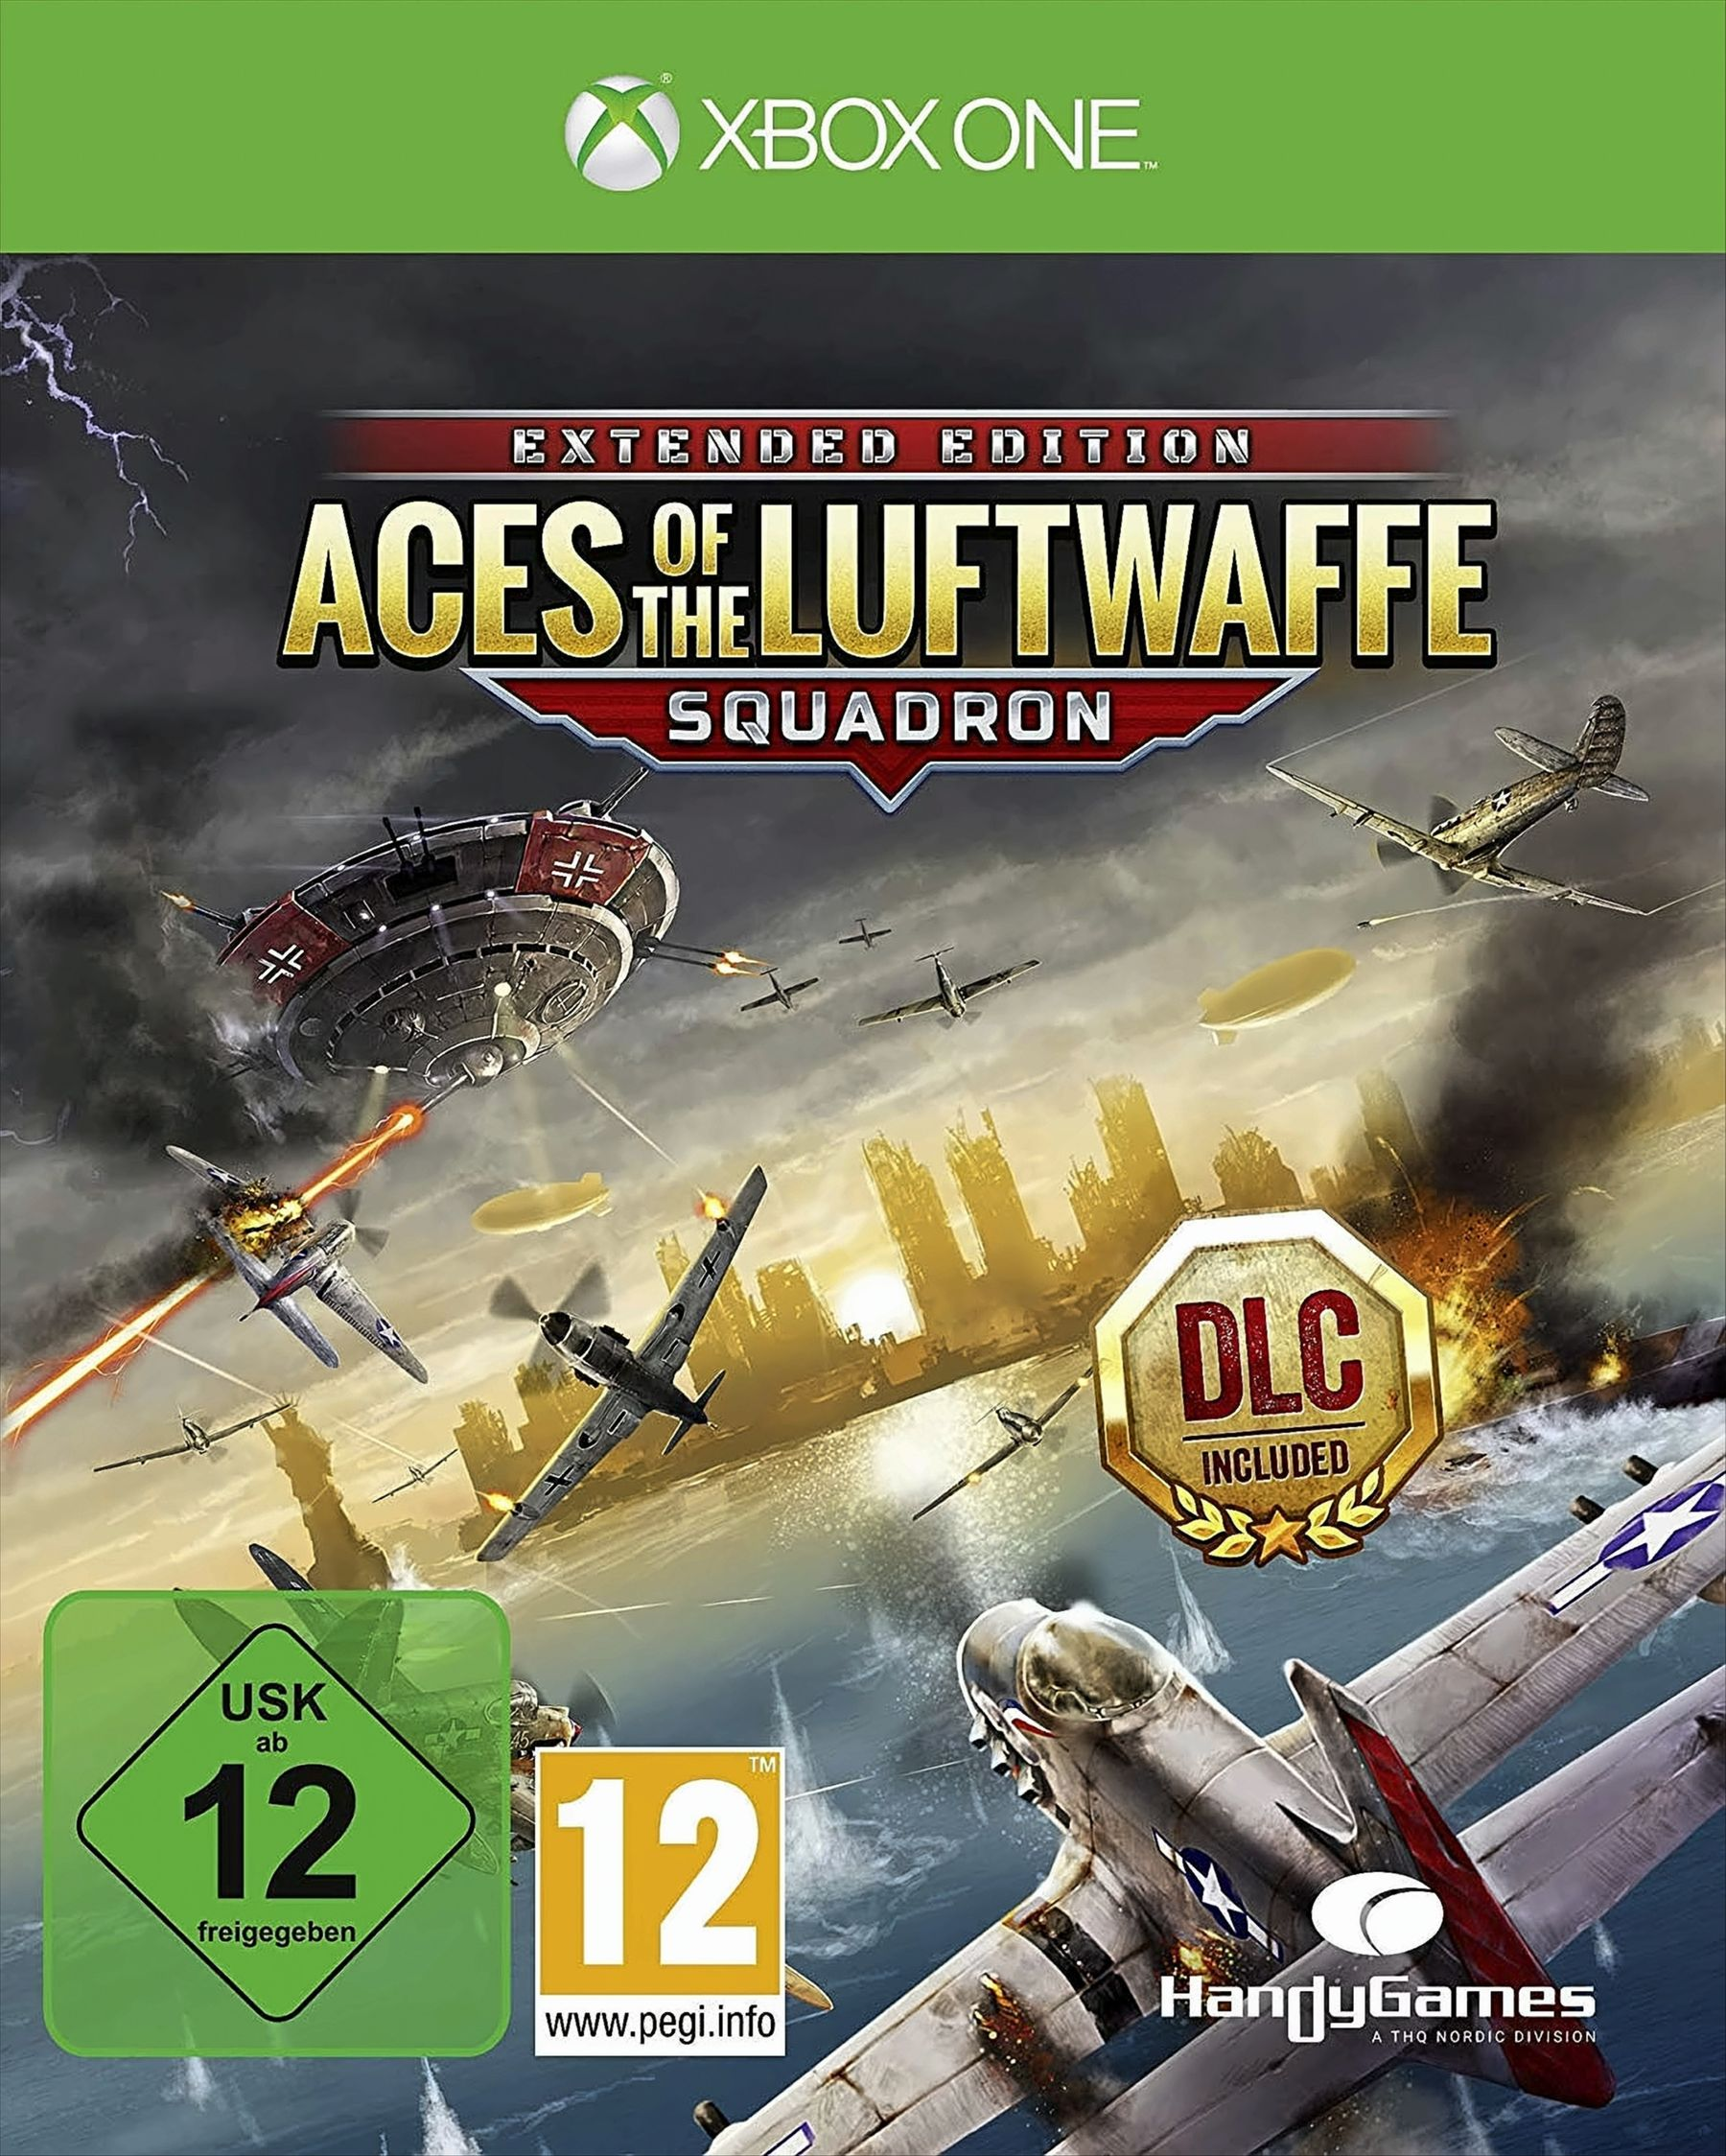 Aces of the [Xbox One] - - Luftwaffe Edition Squadron